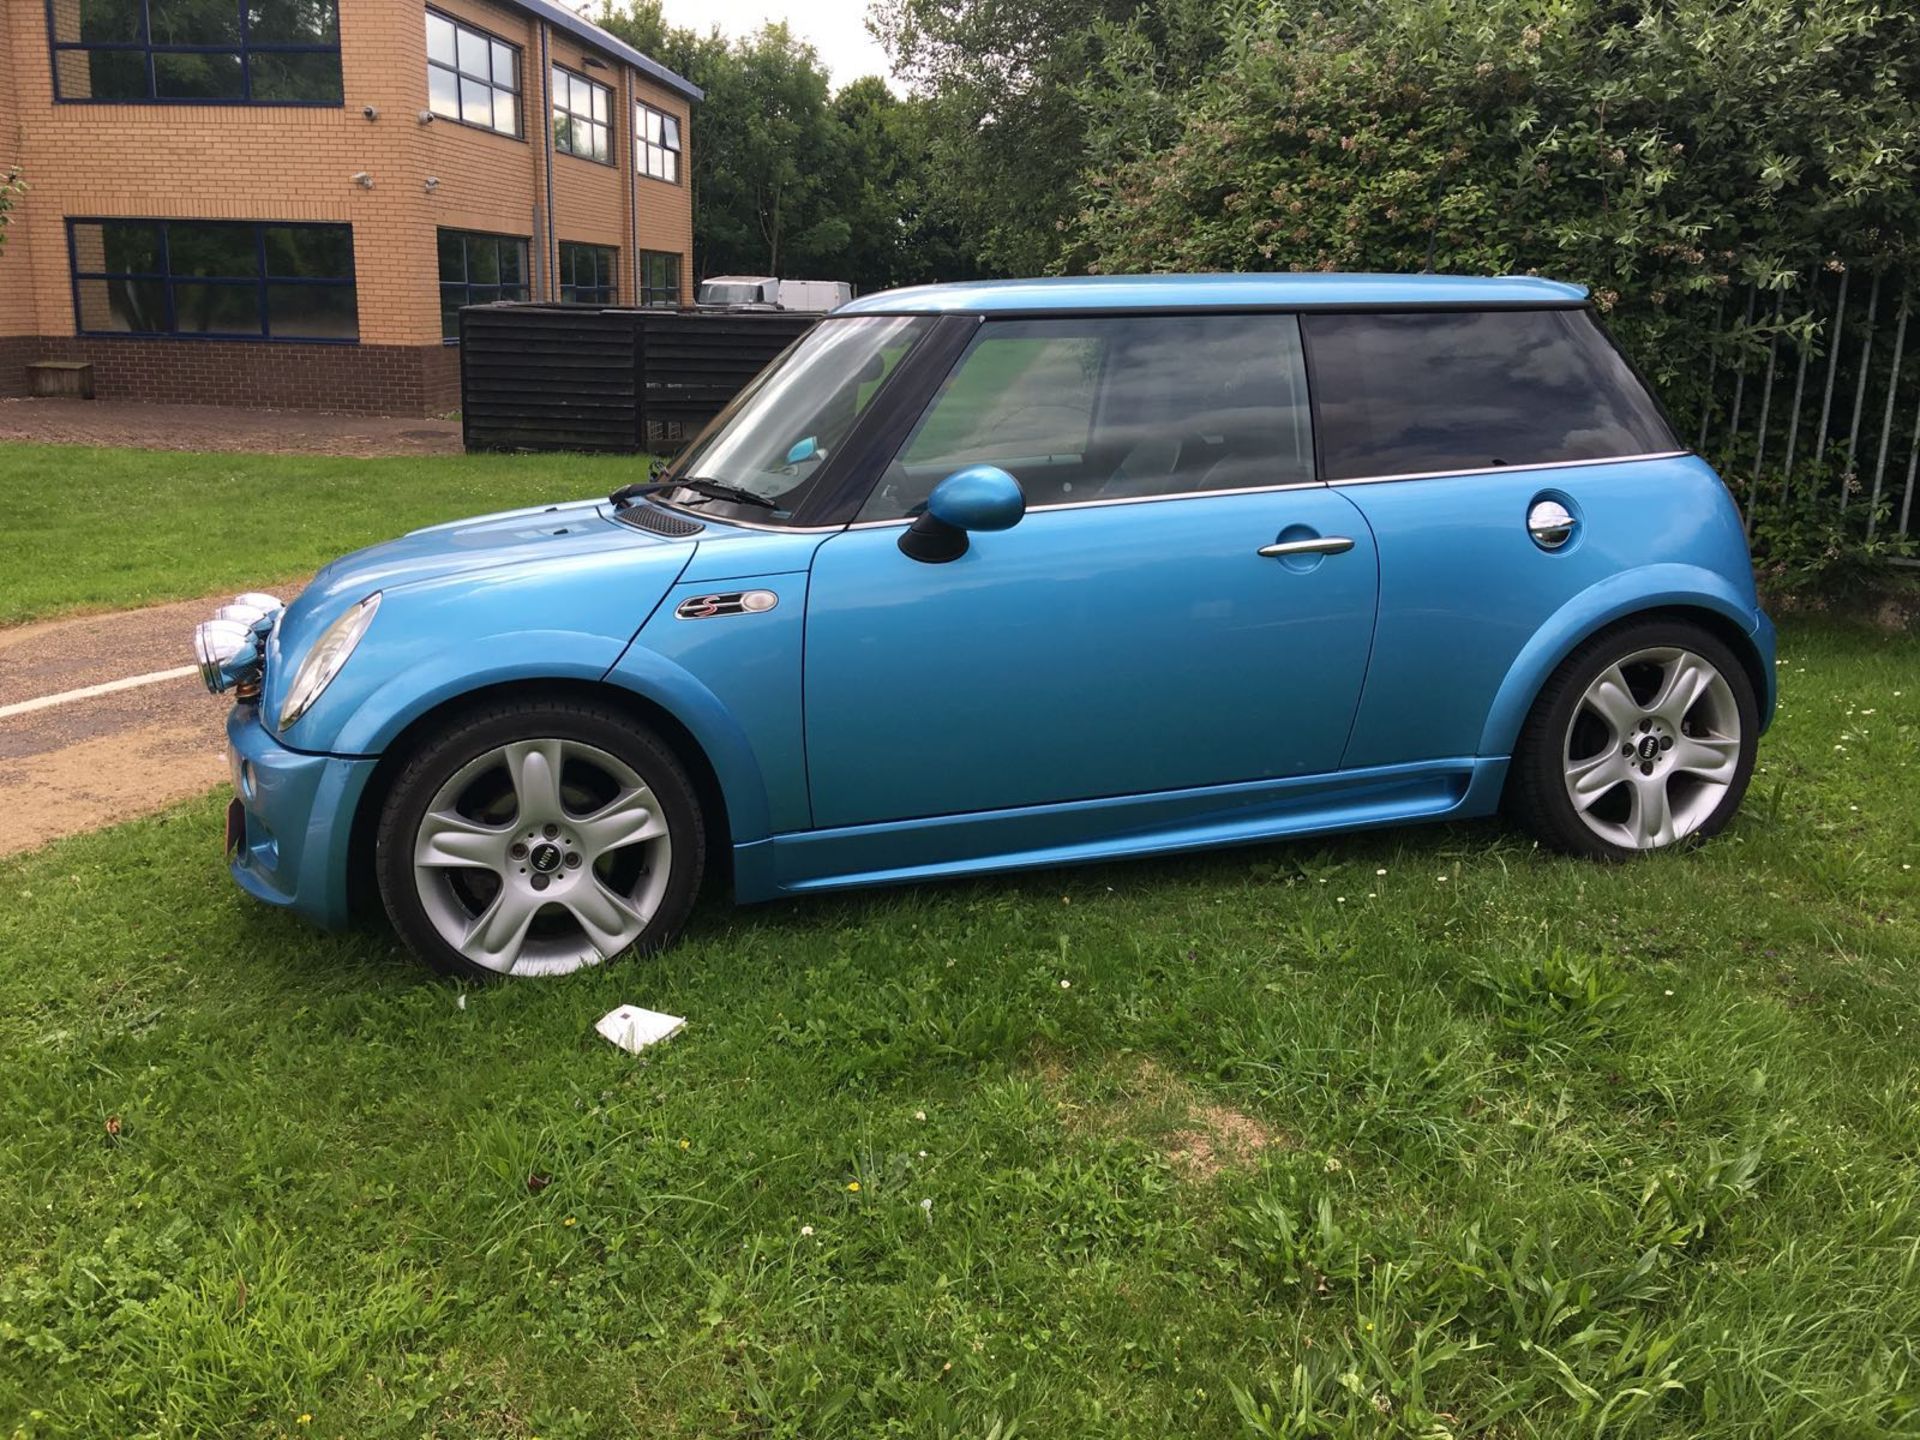 2003 MINI COOPER S (LIMITED EDITION BODY KIT) - Image 4 of 19